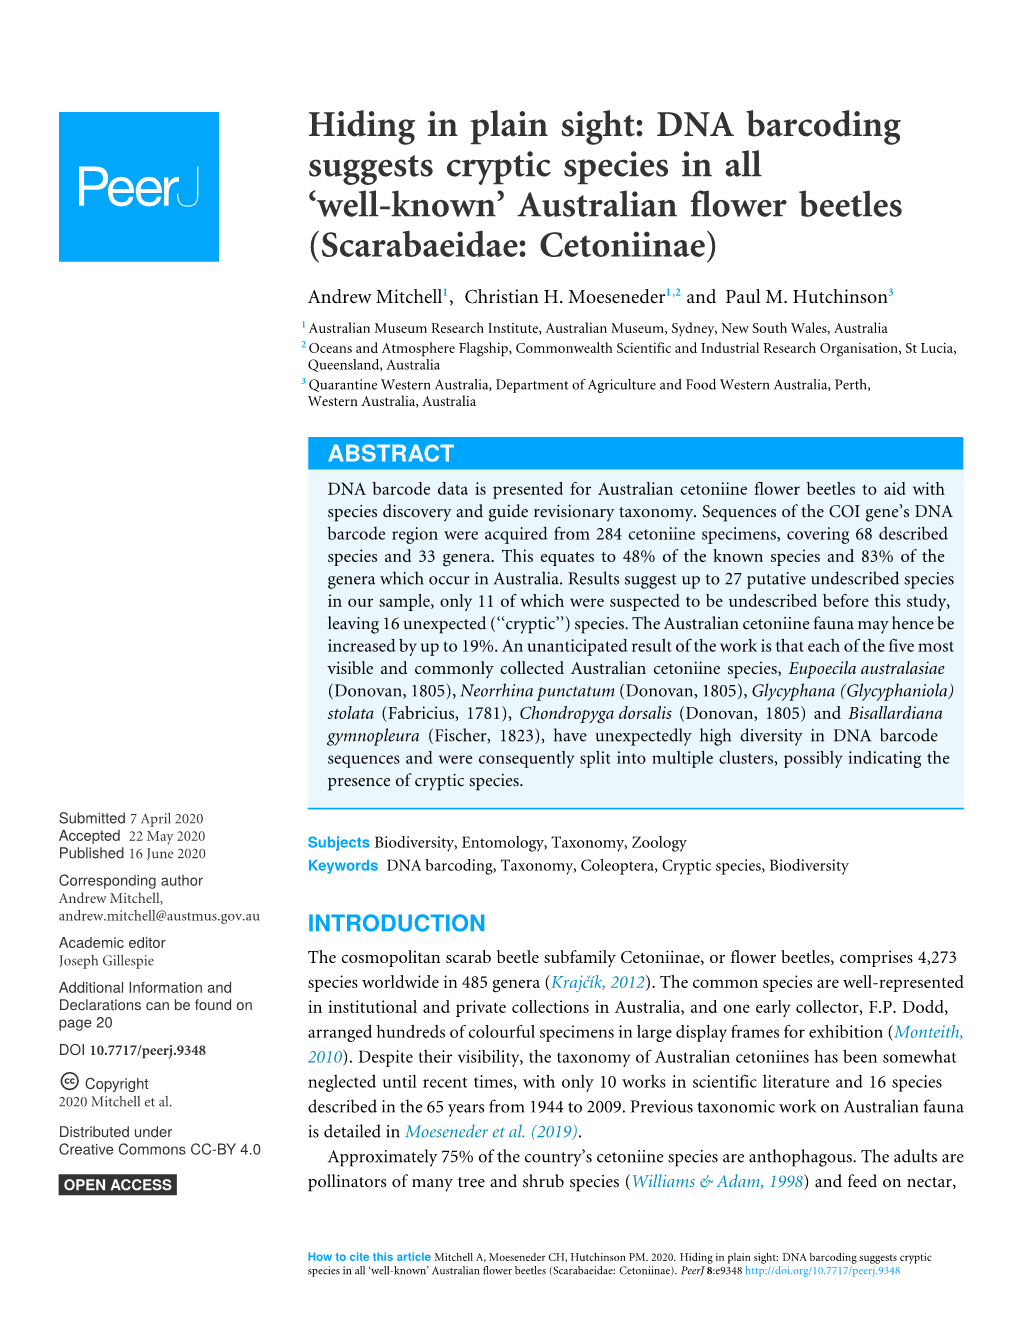 DNA Barcoding Suggests Cryptic Species in All ‘Well-Known’ Australian Flower Beetles (Scarabaeidae: Cetoniinae)